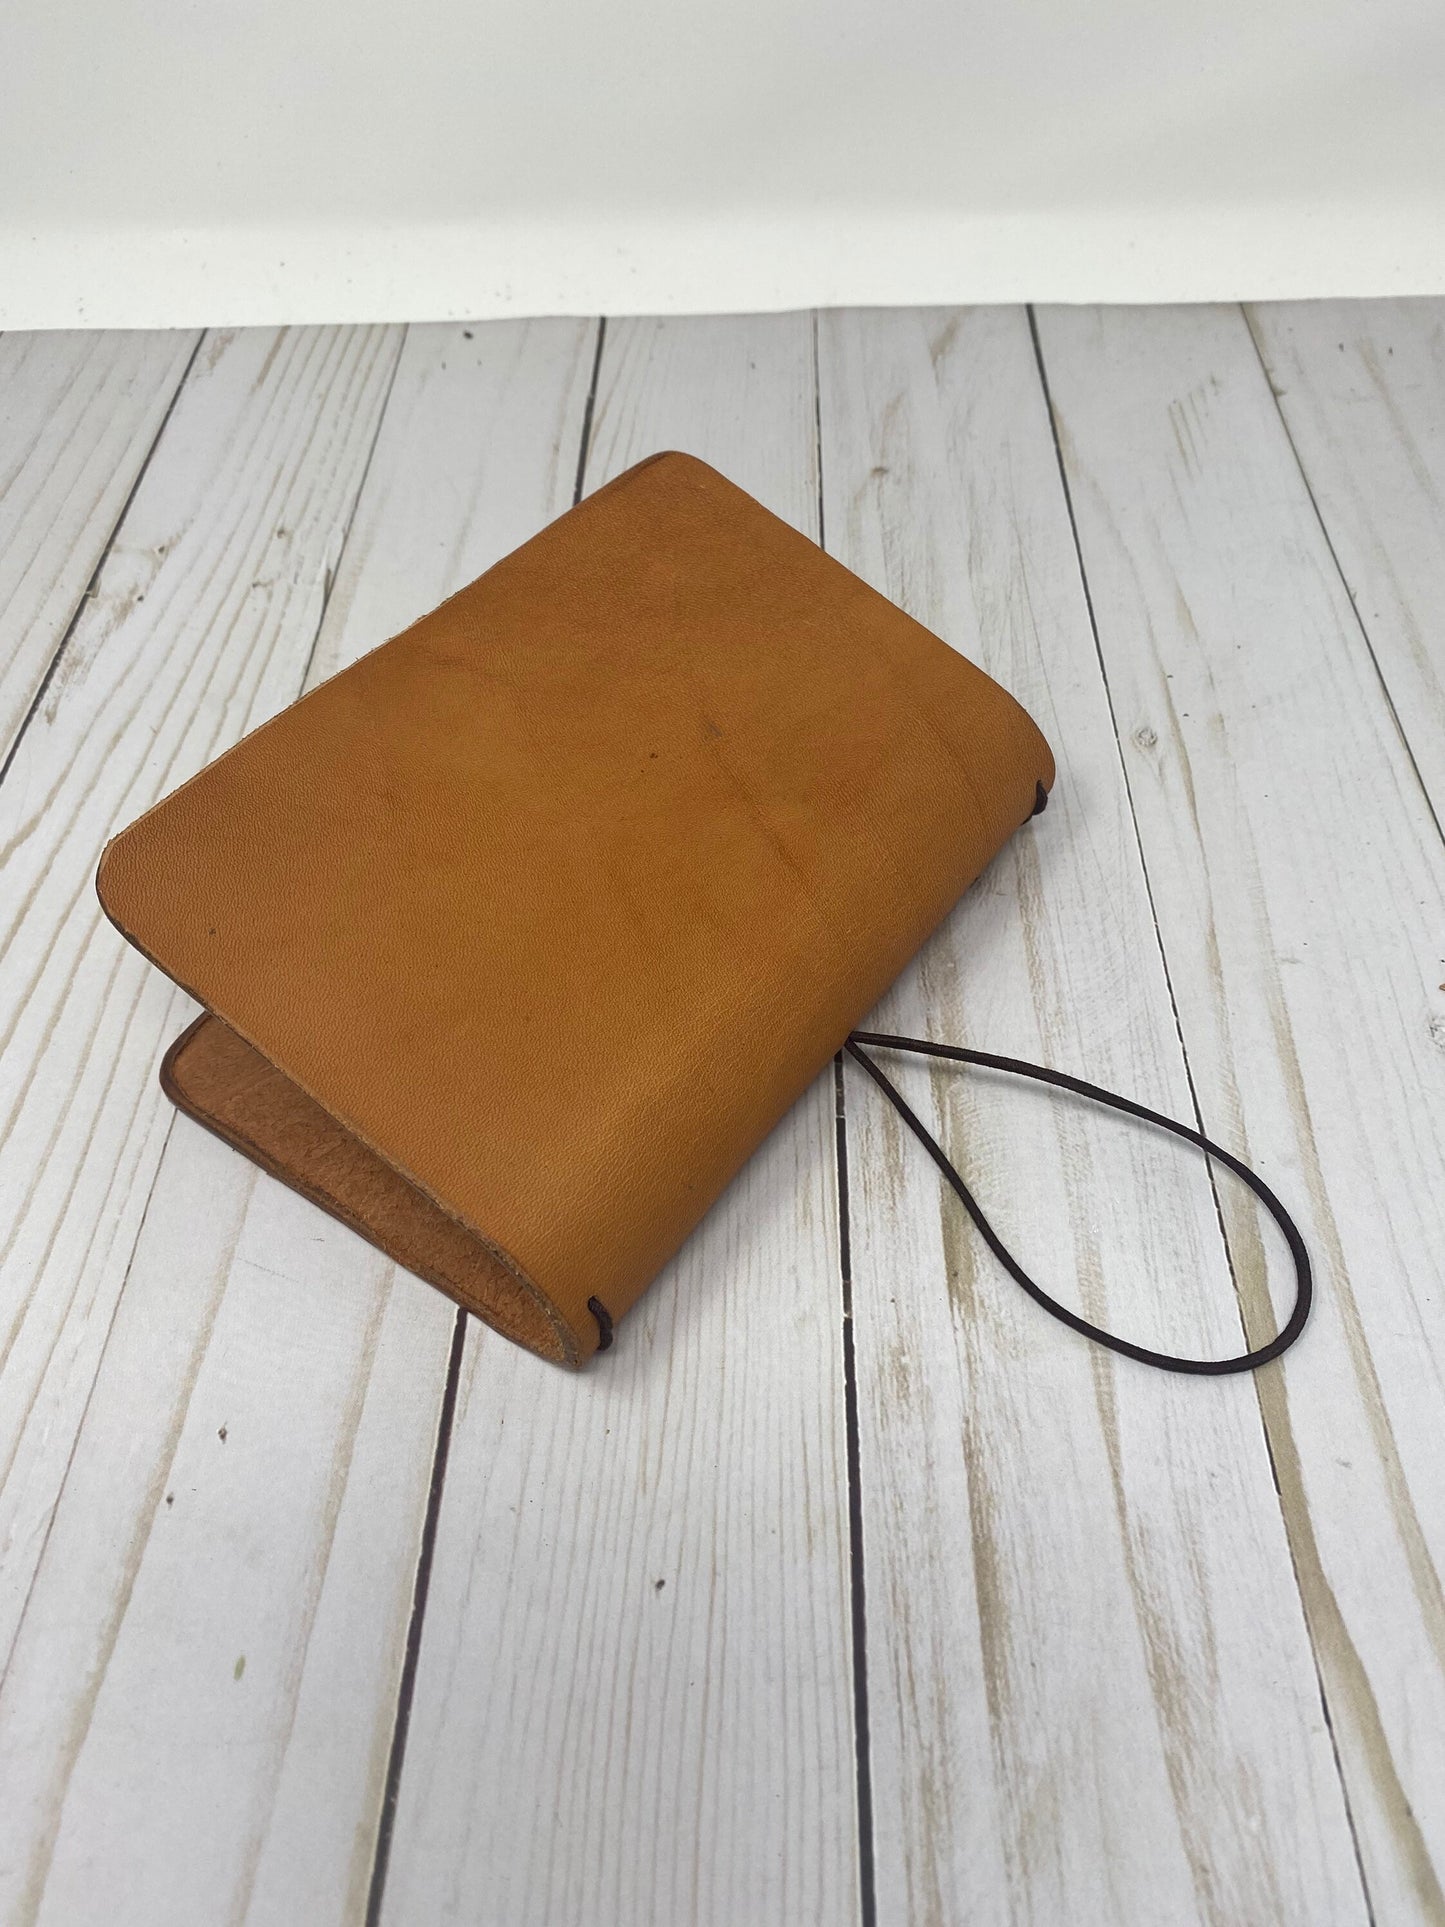 Ready to Ship, Pocket TN, Natural Tan, Full Grain Vegetable Tanned, Leather Journal, Traveler's Notebook